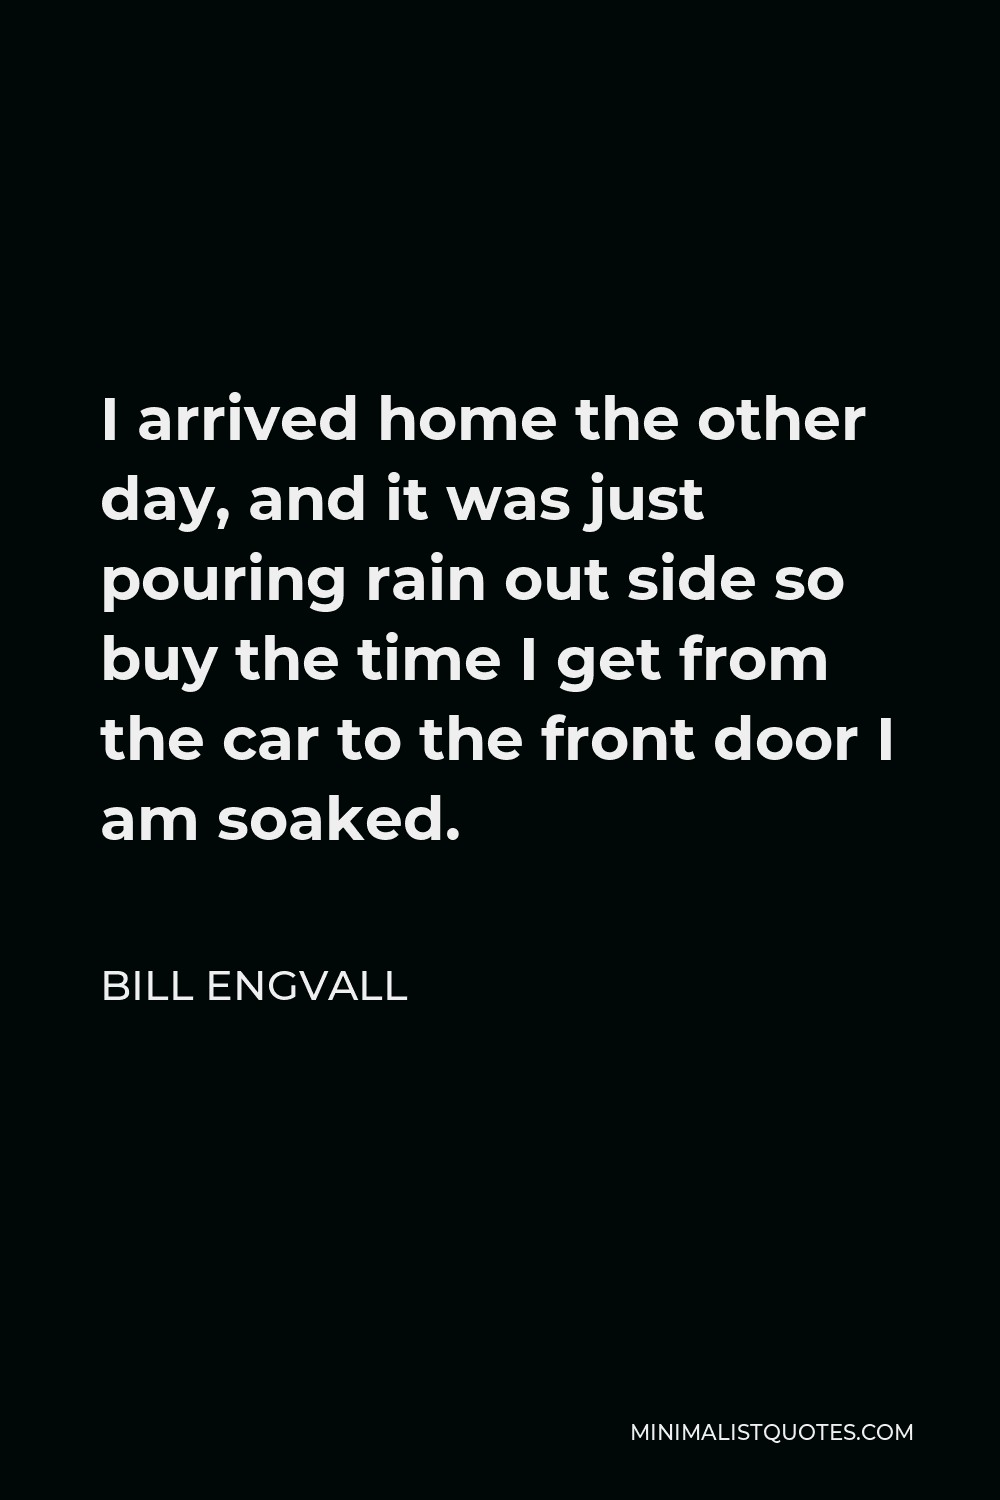 Bill Engvall Quote - I arrived home the other day, and it was just pouring rain out side so buy the time I get from the car to the front door I am soaked.